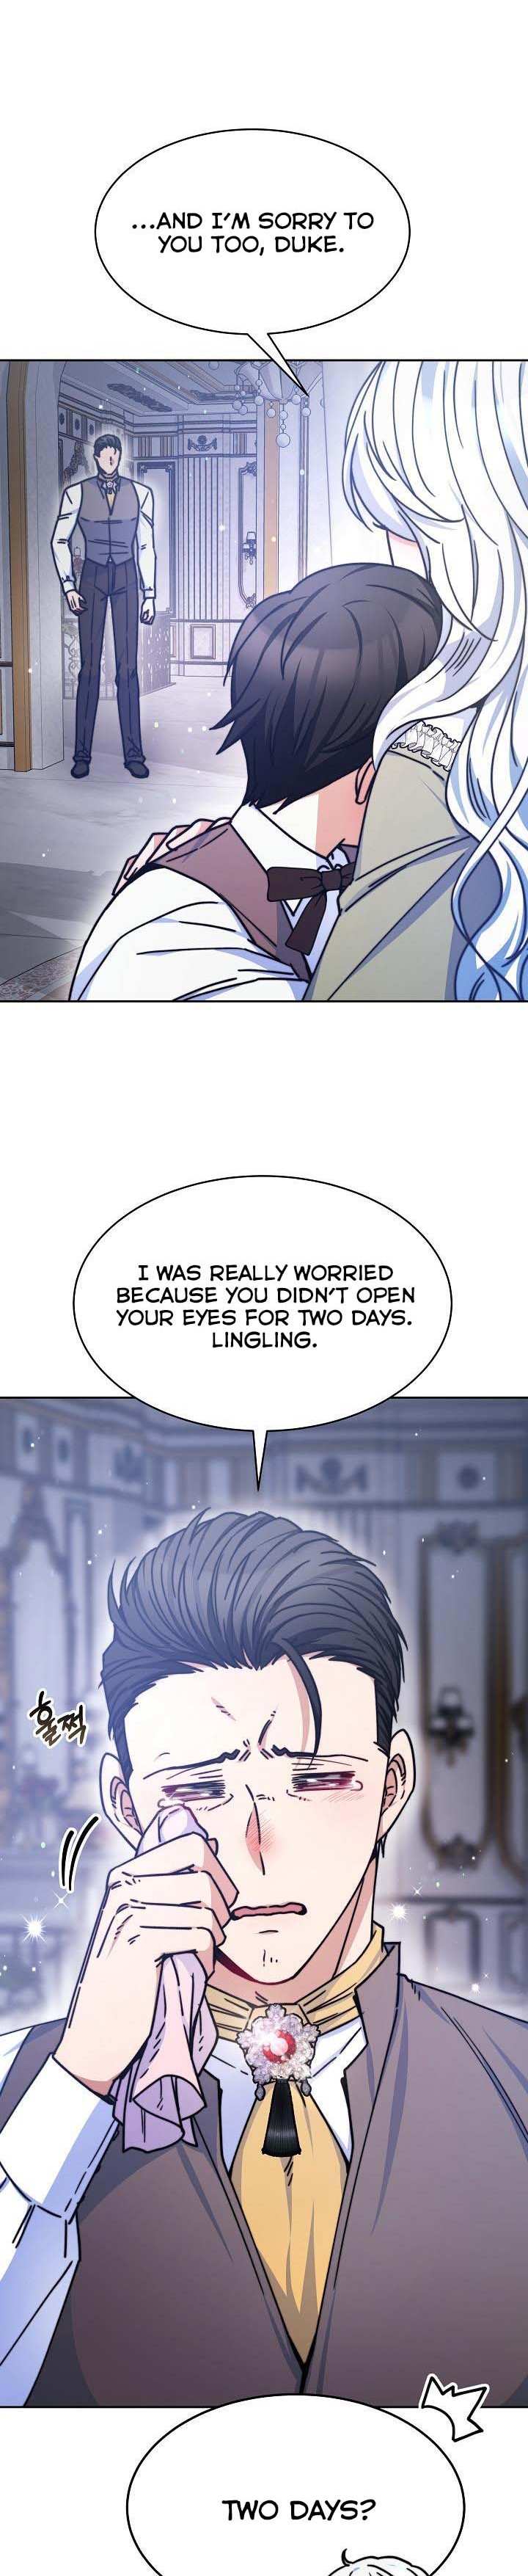 Evangeline After the Ending  - page 4